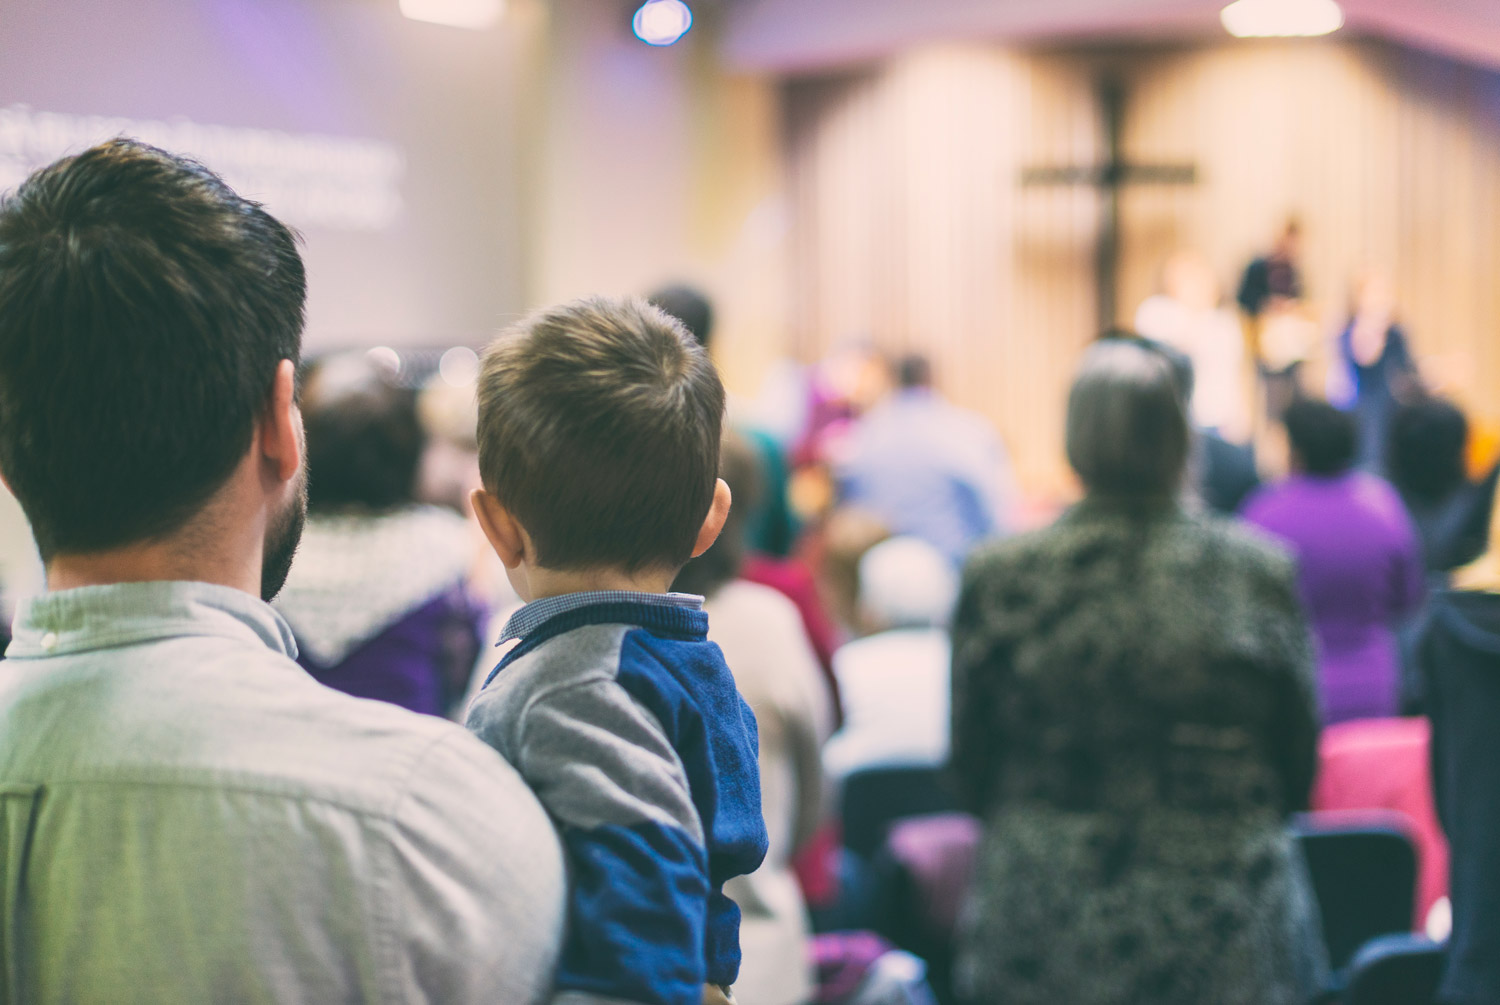 Man and child participating in worship service